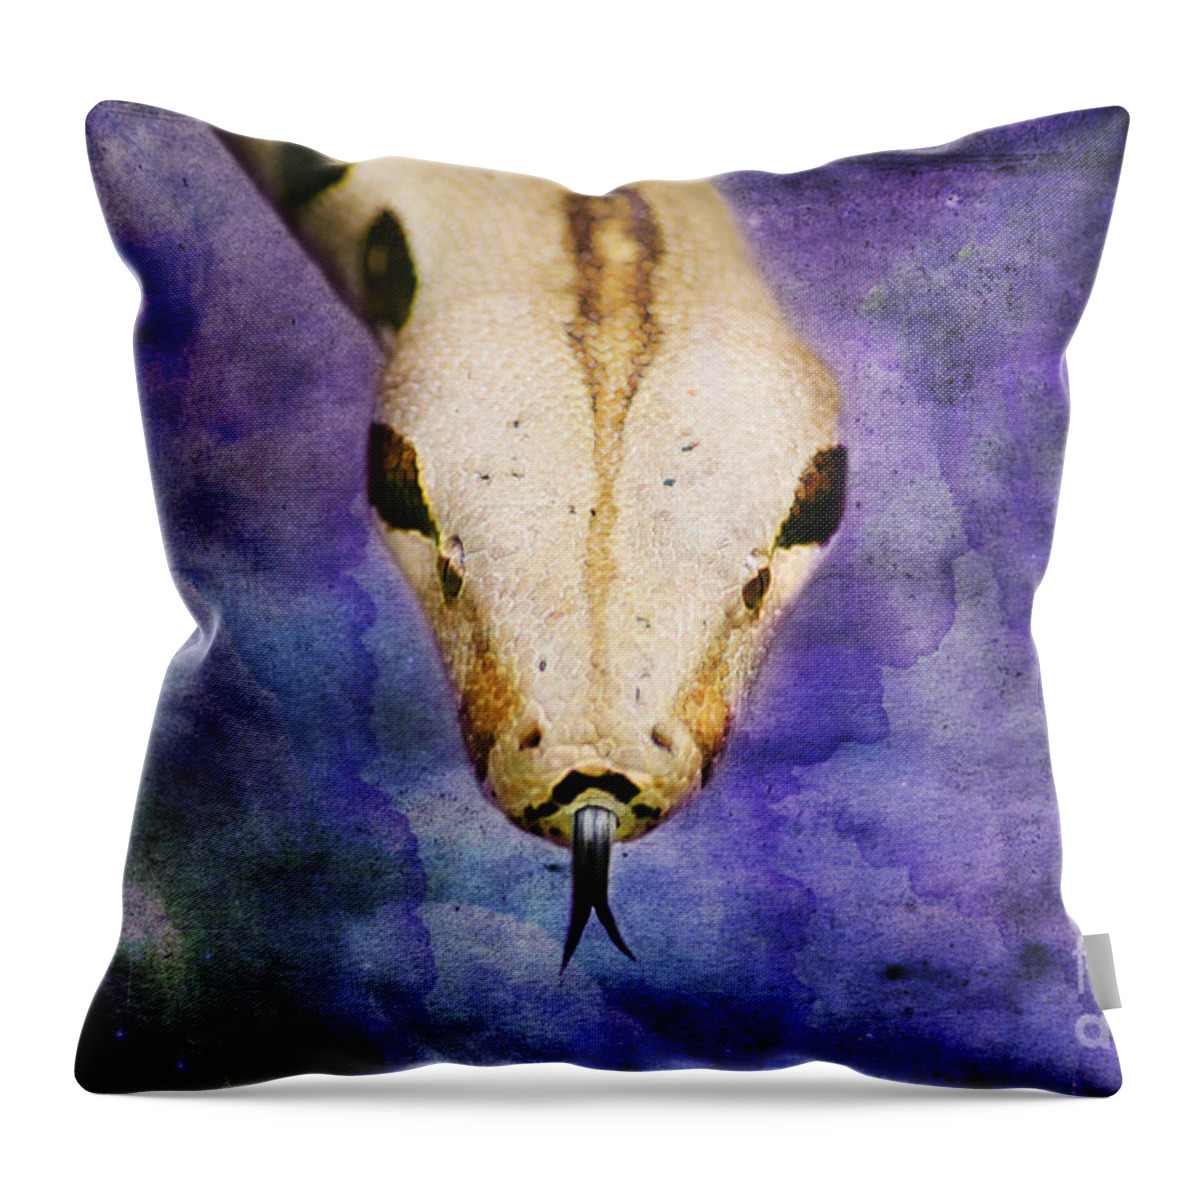 Boa Throw Pillow featuring the digital art Boa Snake by Lisa Redfern